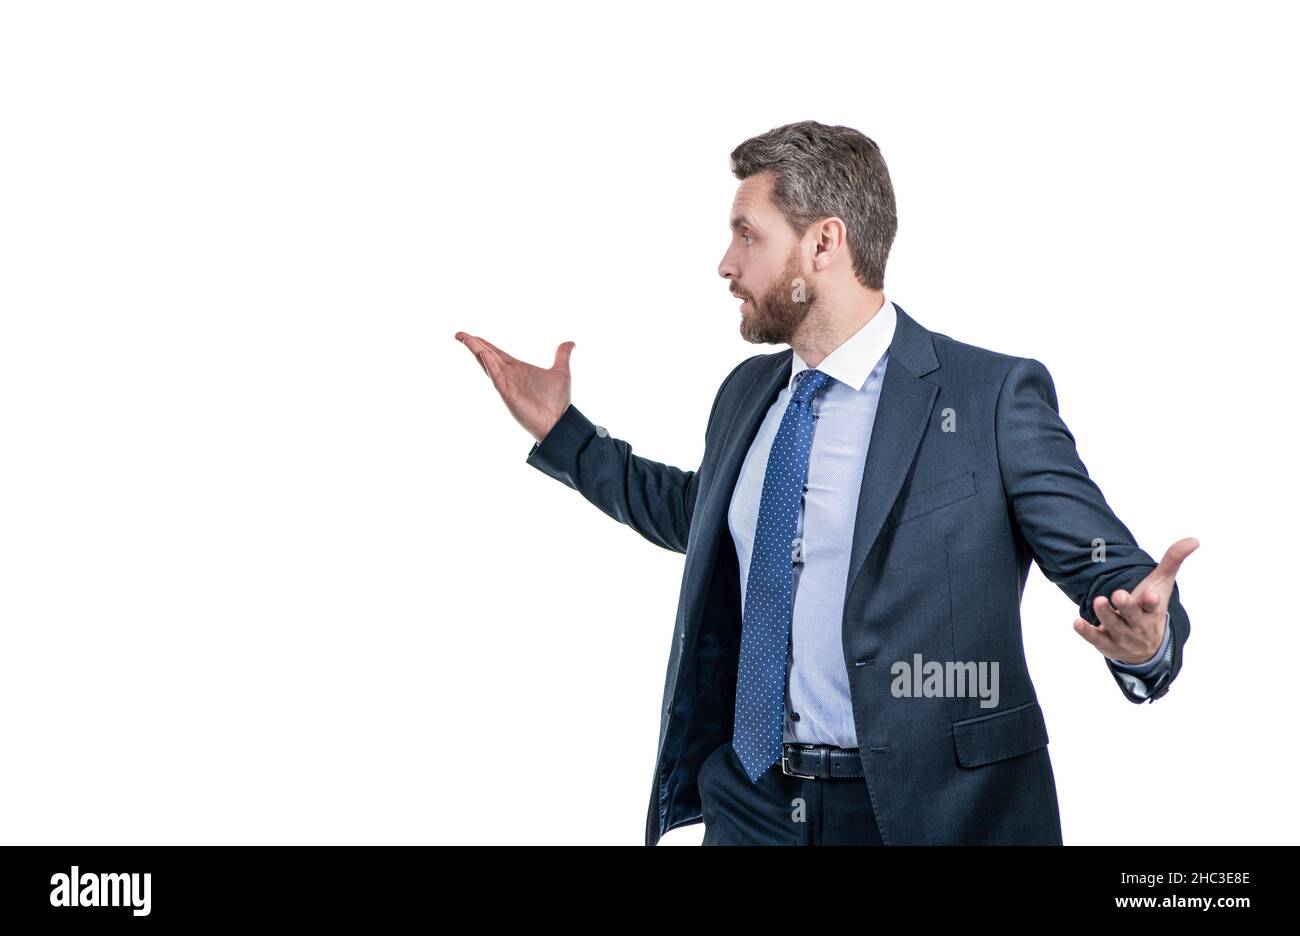 Gesticulating wildly. Businessman hold arms wide open gesticulating. Man with wide hand gesture Stock Photo